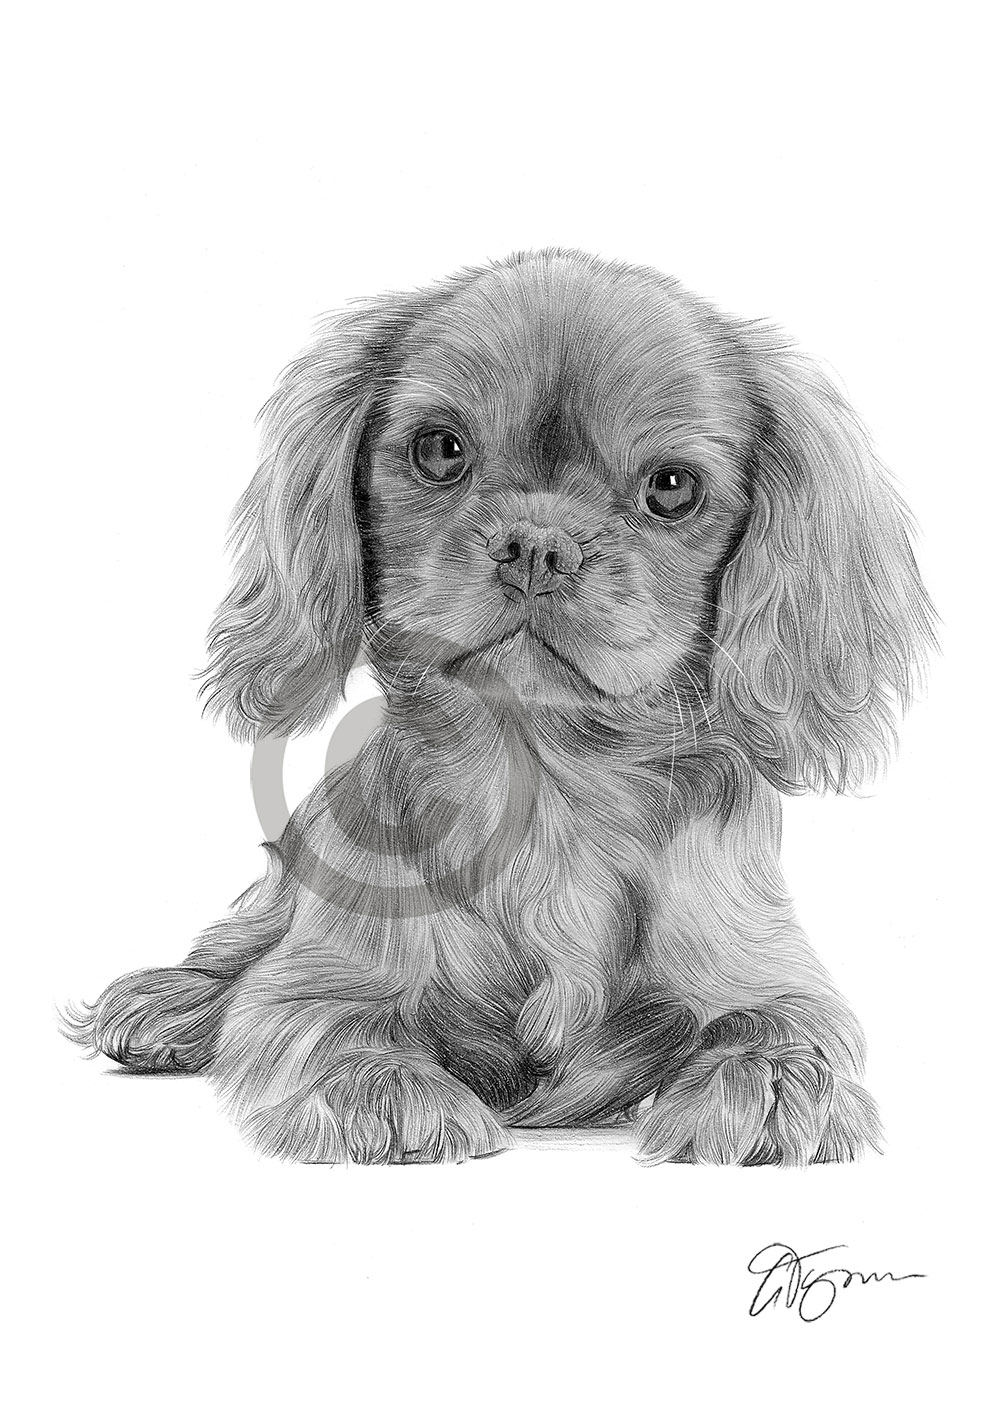 Pencil drawing of a King Charles Spaniel puppy by artist Gary Tymon